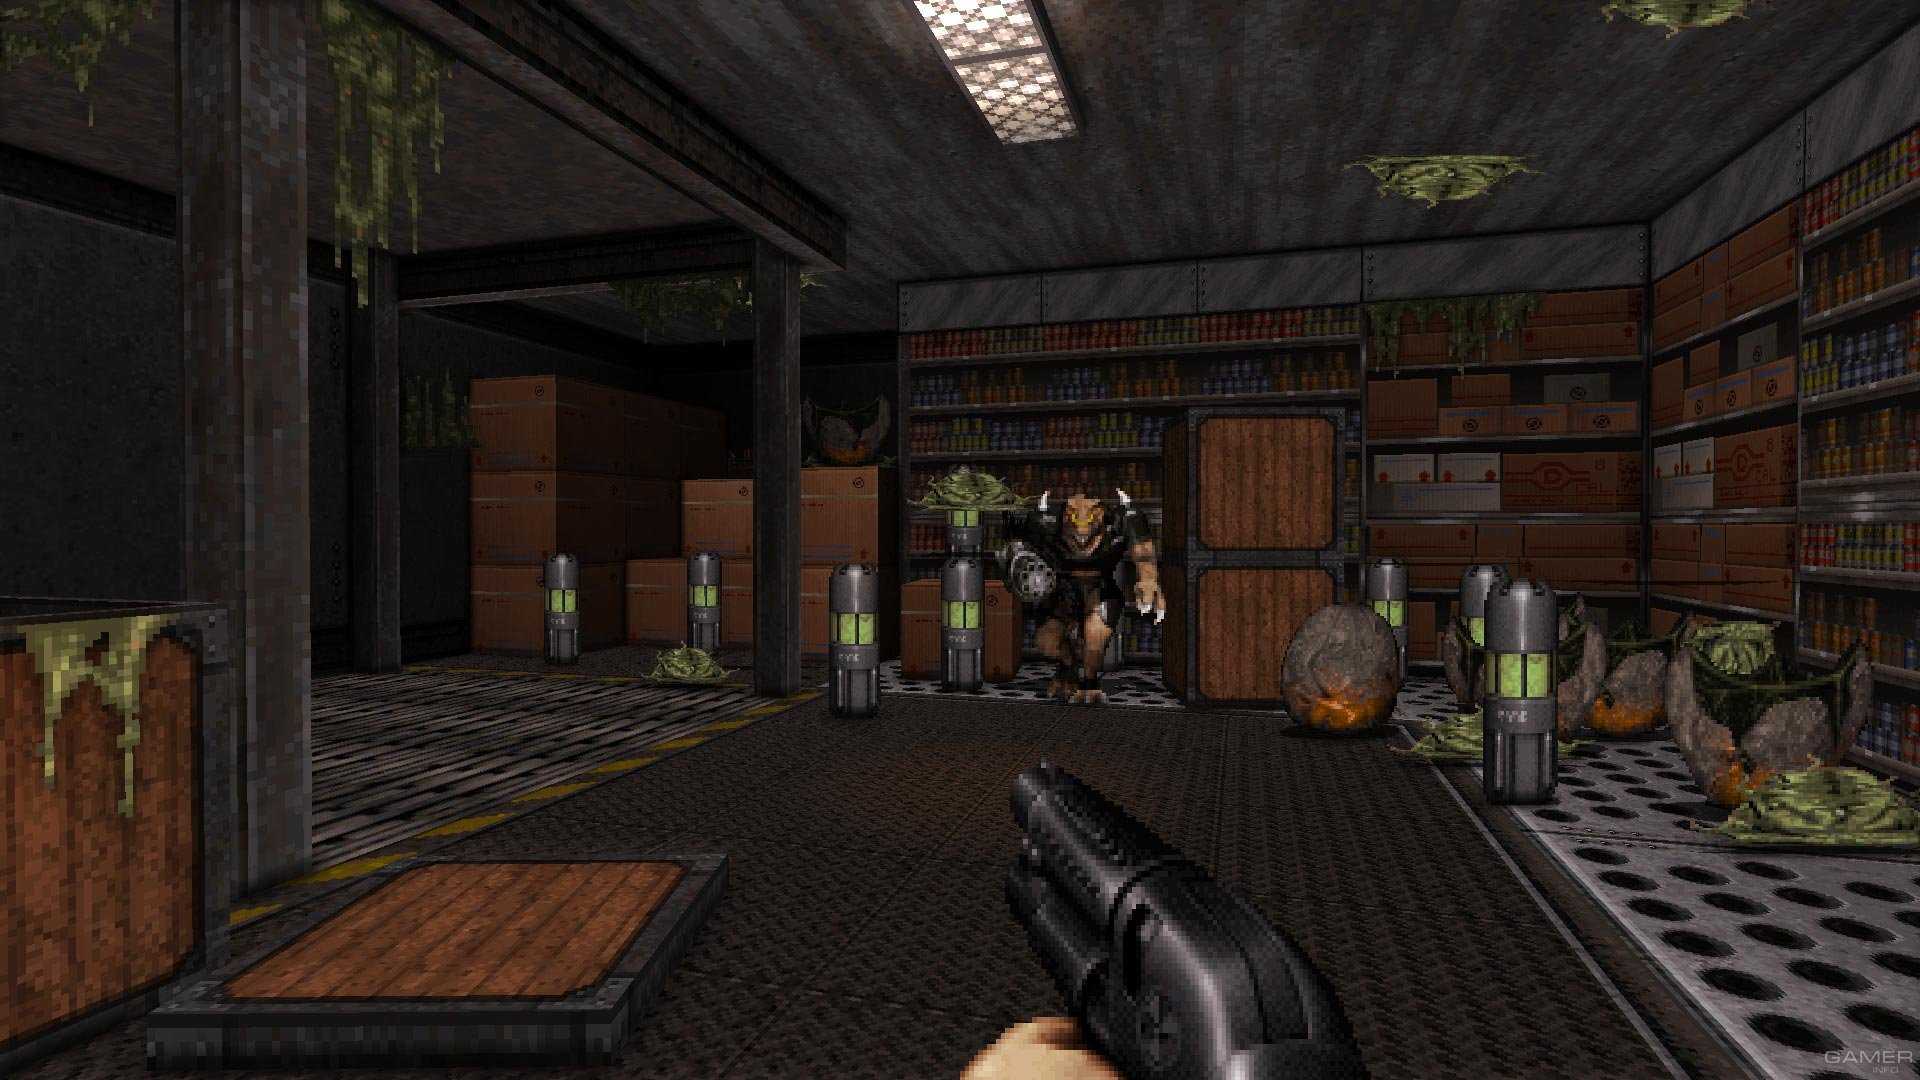 You are supposed to be here! 22 года релизу легендарной игры duke nukem 3d